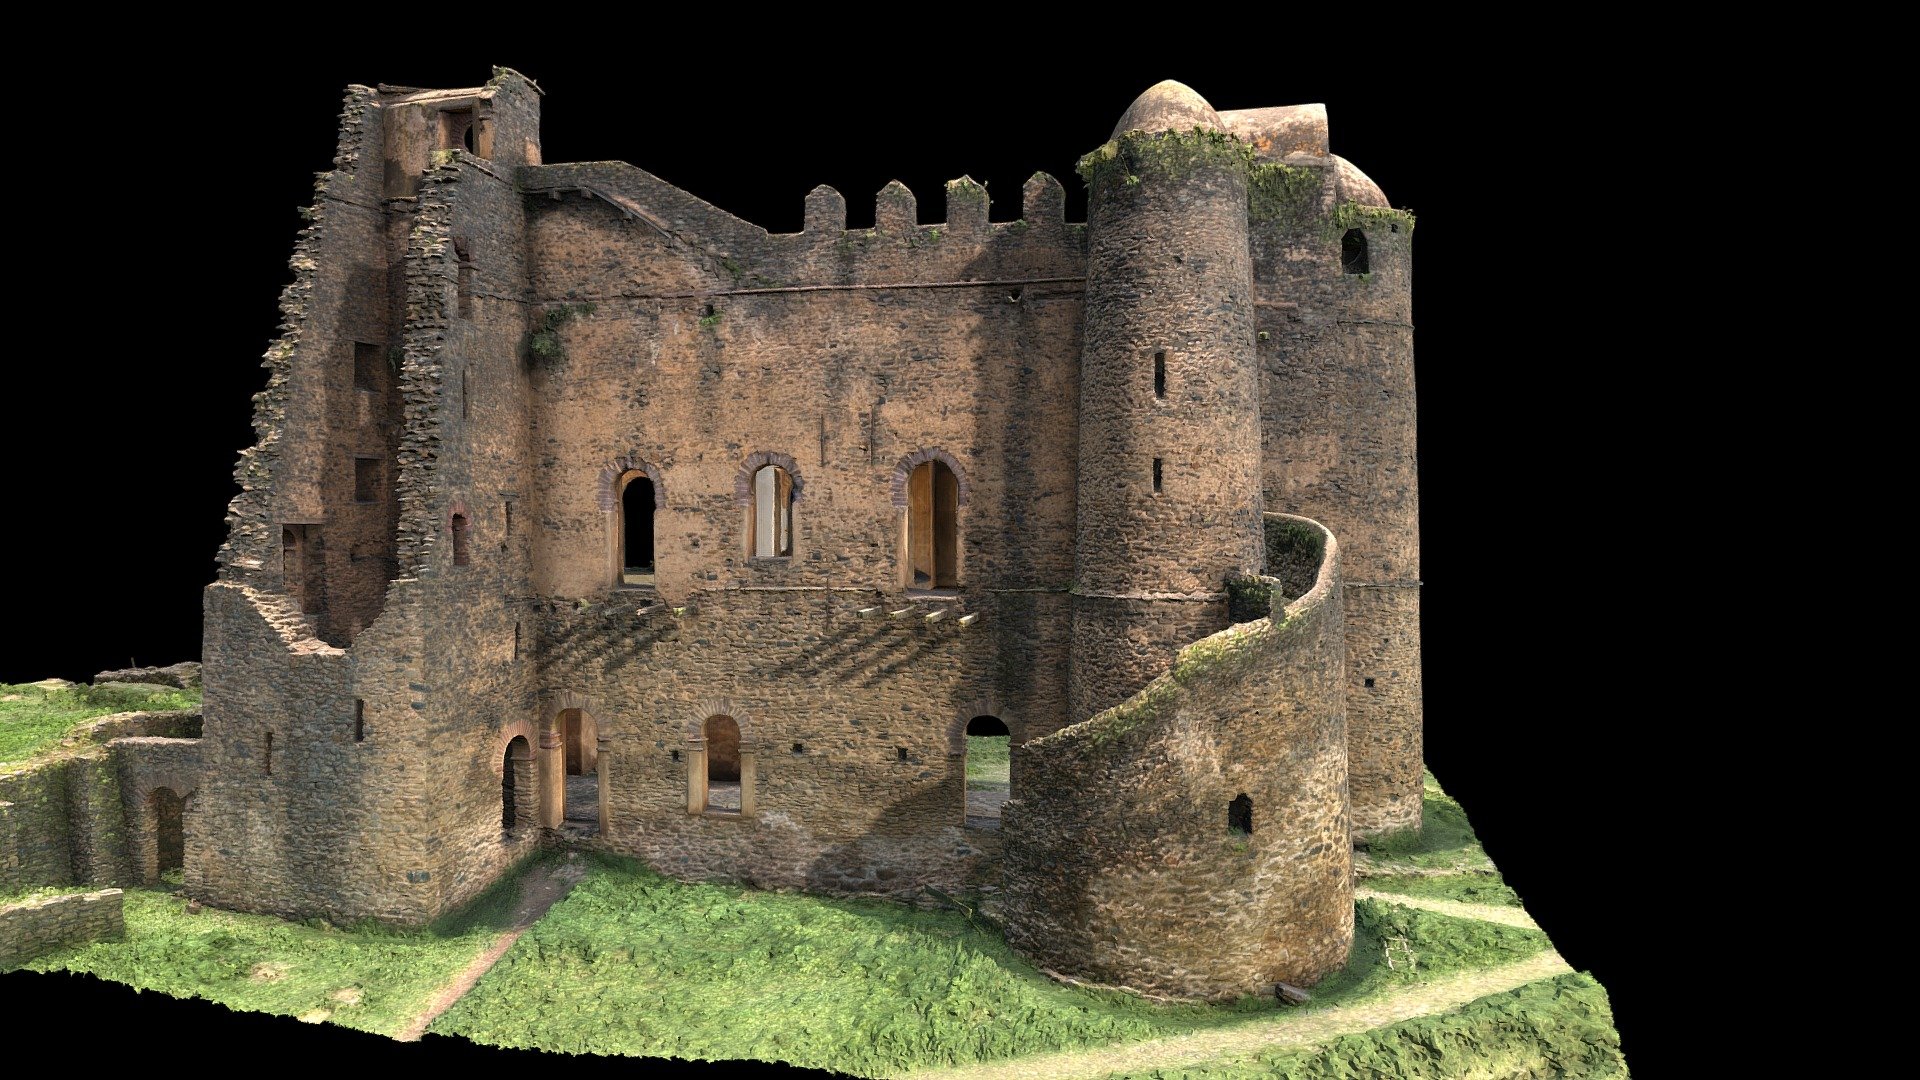 The Zamani Project visited Gondar in Ethiopia in September 2018 to record 6 monuments in Fasil Ghebbi. This model was created using Z+F 5016 laser scanner, Phantom 4 Pro Drone images and Nikon 7200 DSLR images 3d model